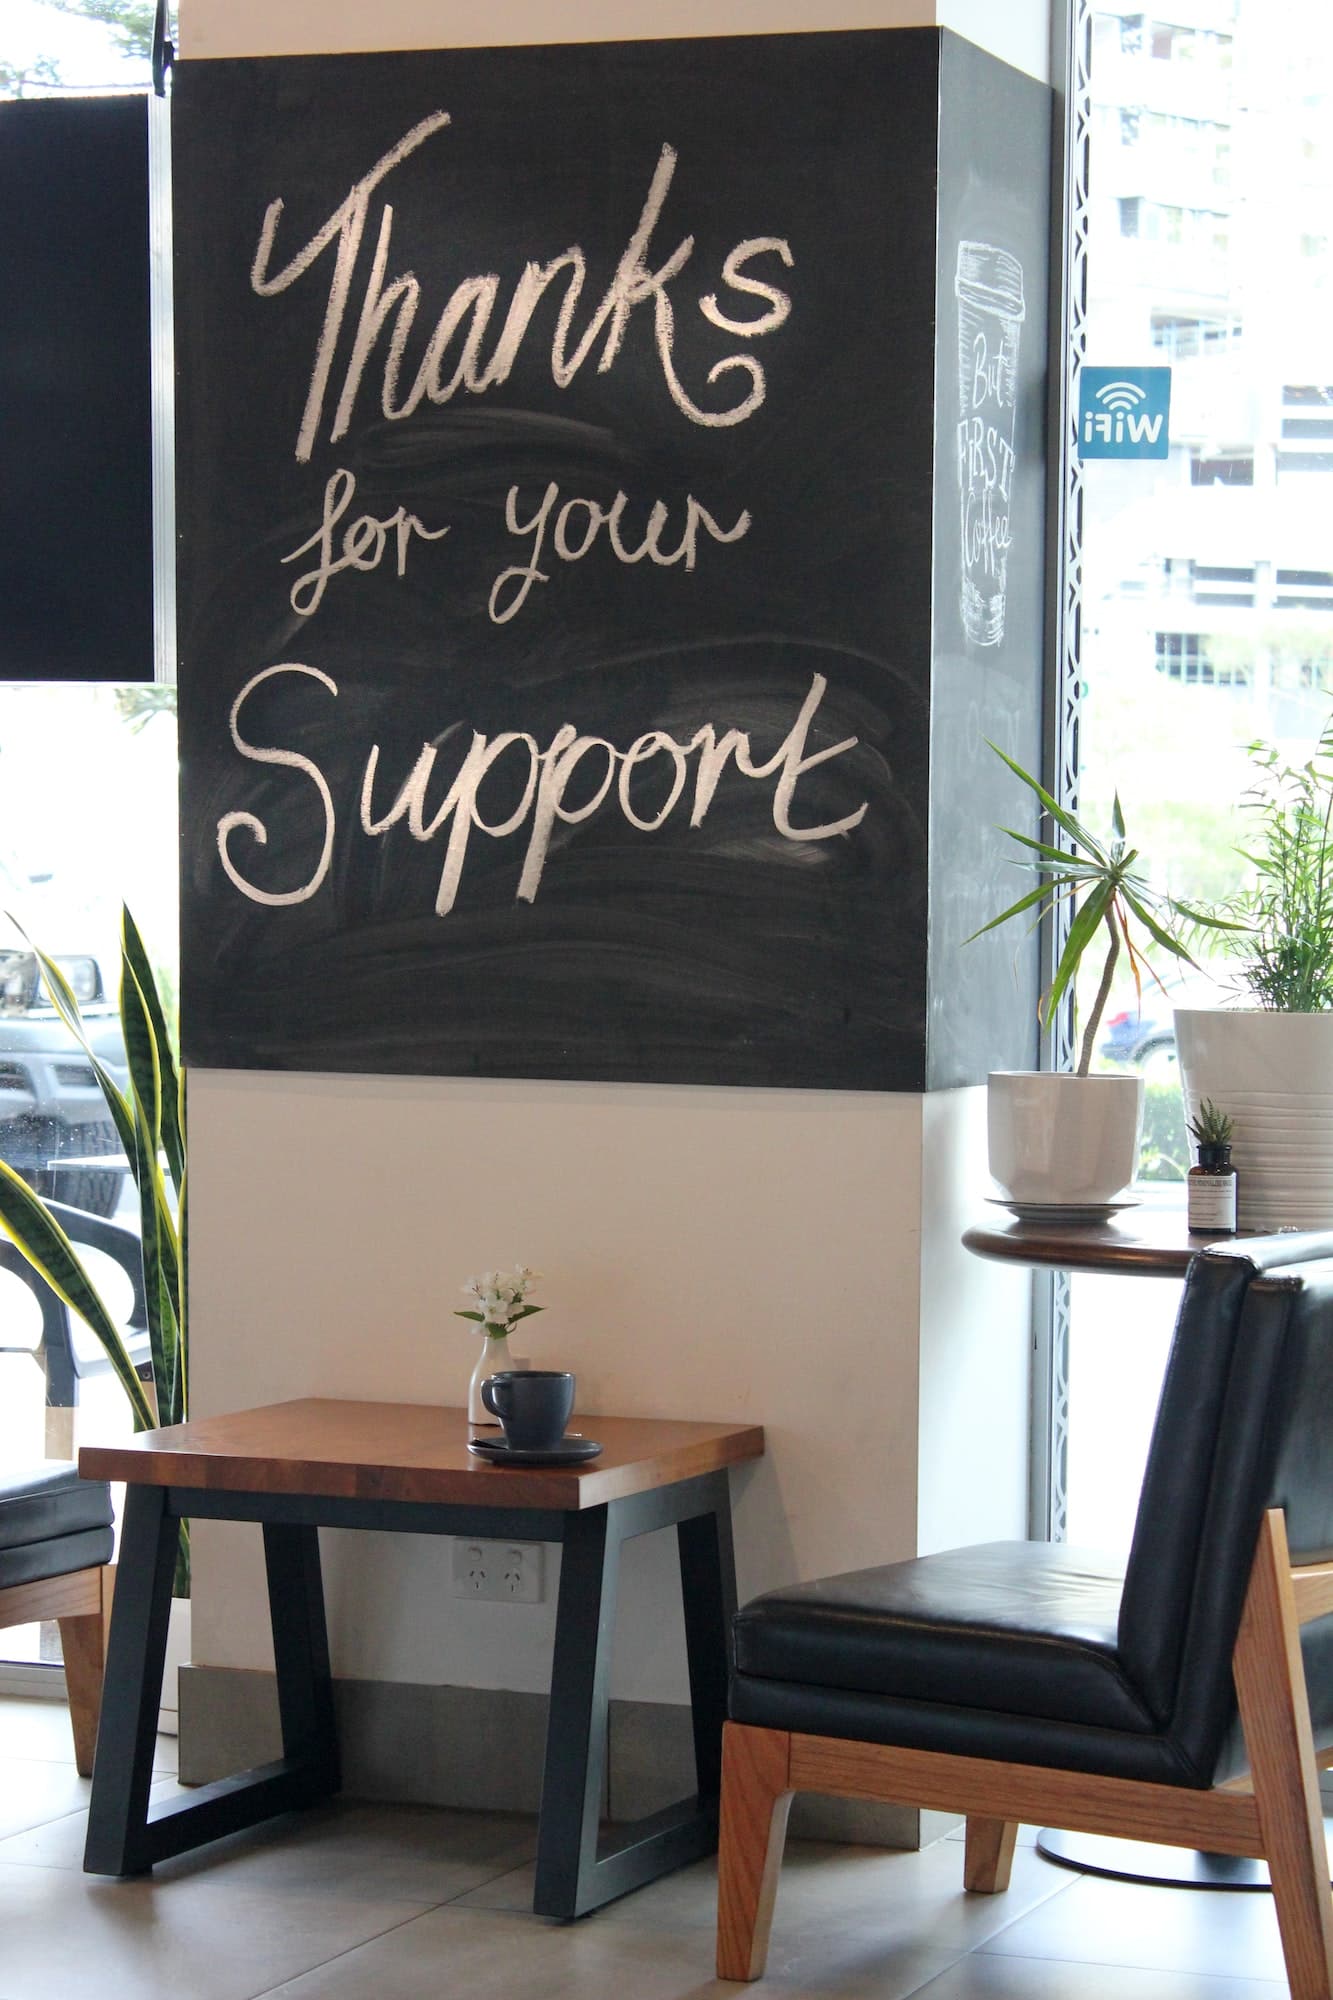 Small business Thank you sign in a cafe